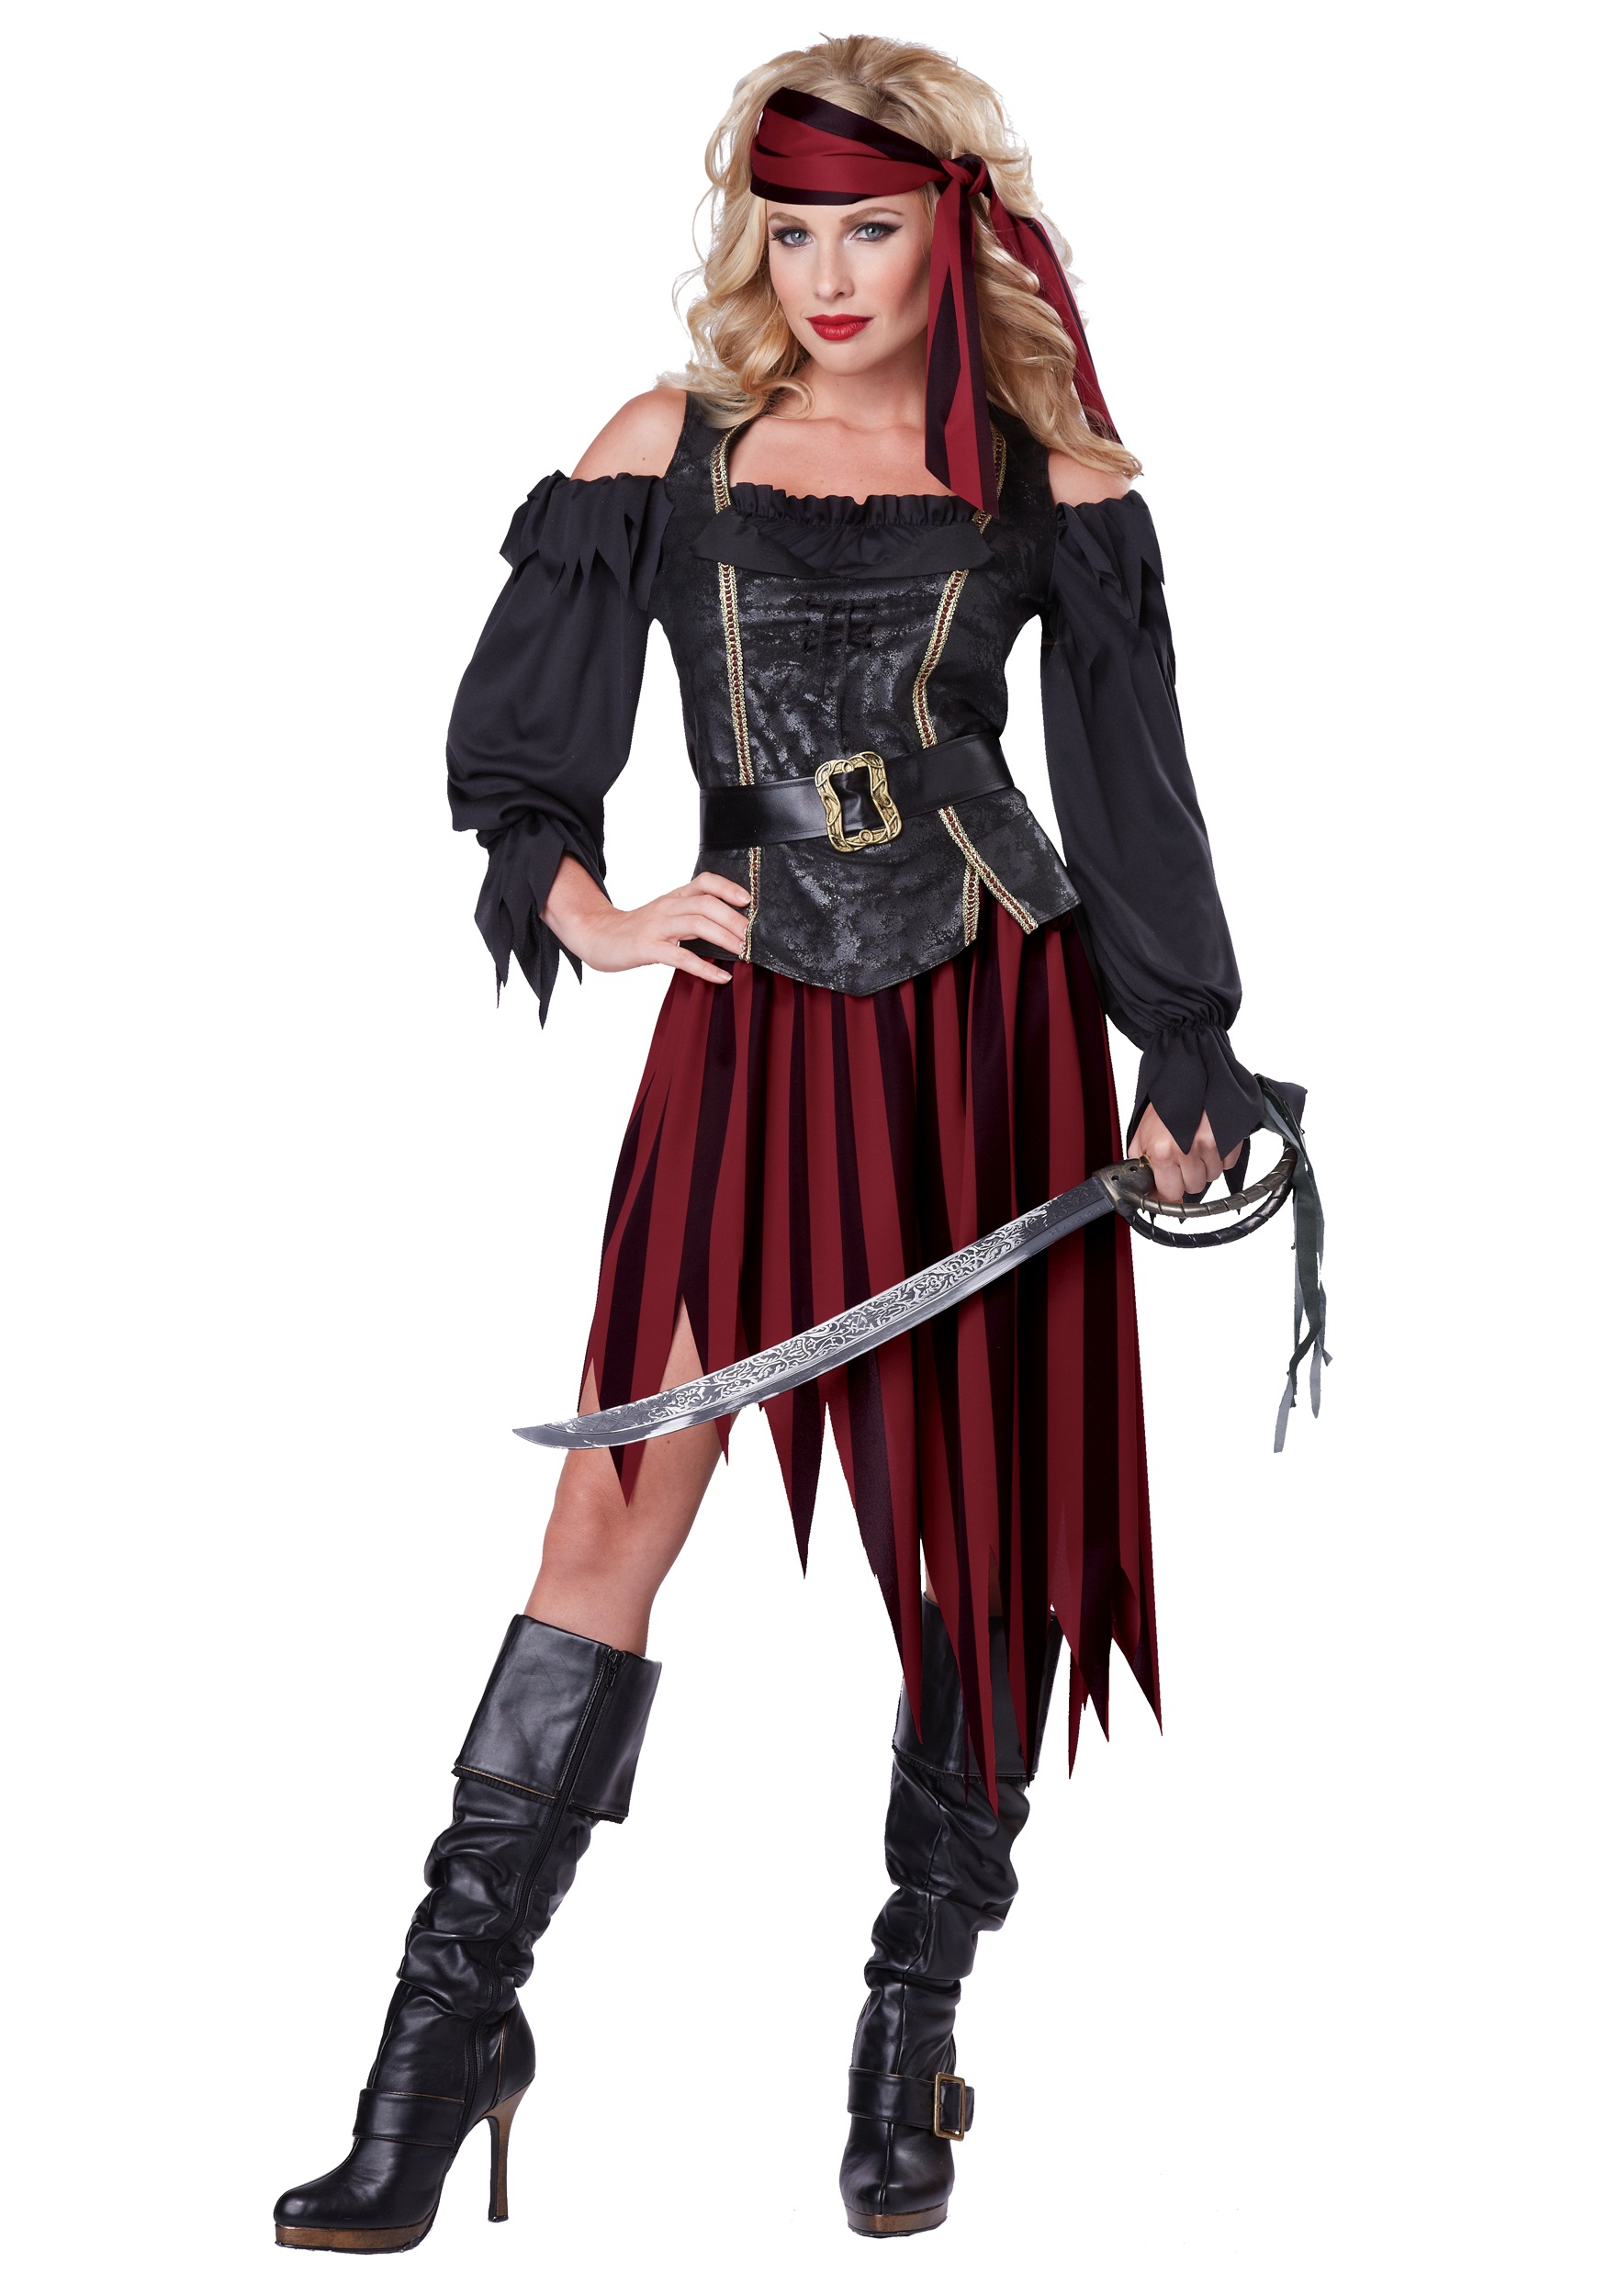 Photos - Fancy Dress California Costume Collection Women's Queen of the High Seas Costume Black 